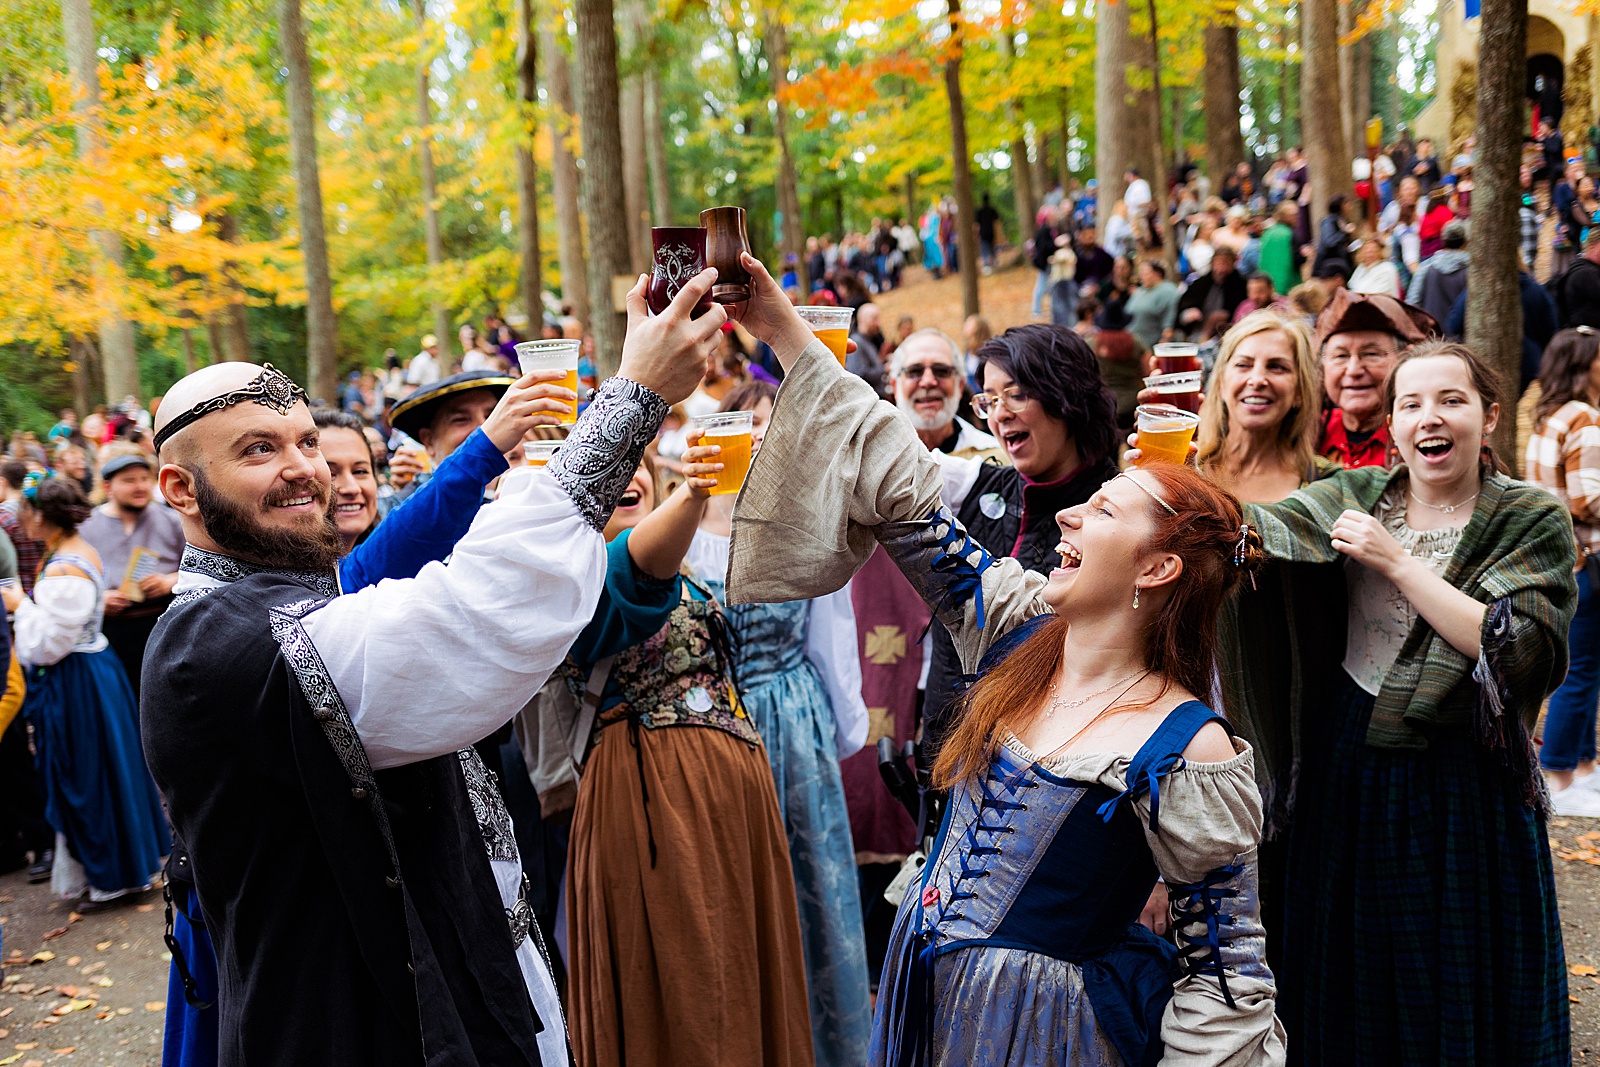 Huzzah! Bride and groom cheers with their guests after their MD Renn Fest wedding.